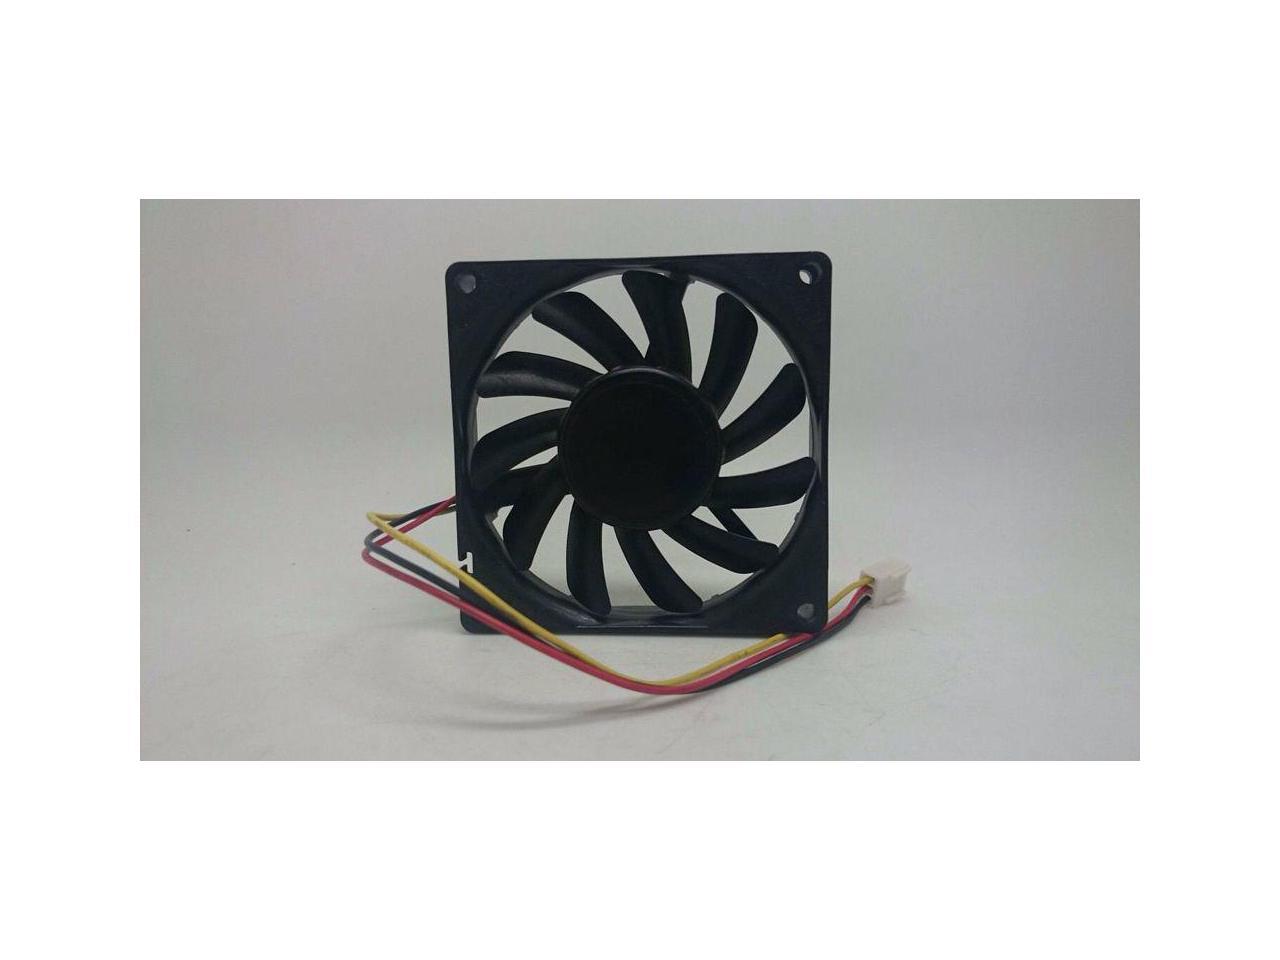 For Sanyo 109p0812h721 For Sanyo 8015 dc12v 0.2A 3-p Axial Cooling Fan 